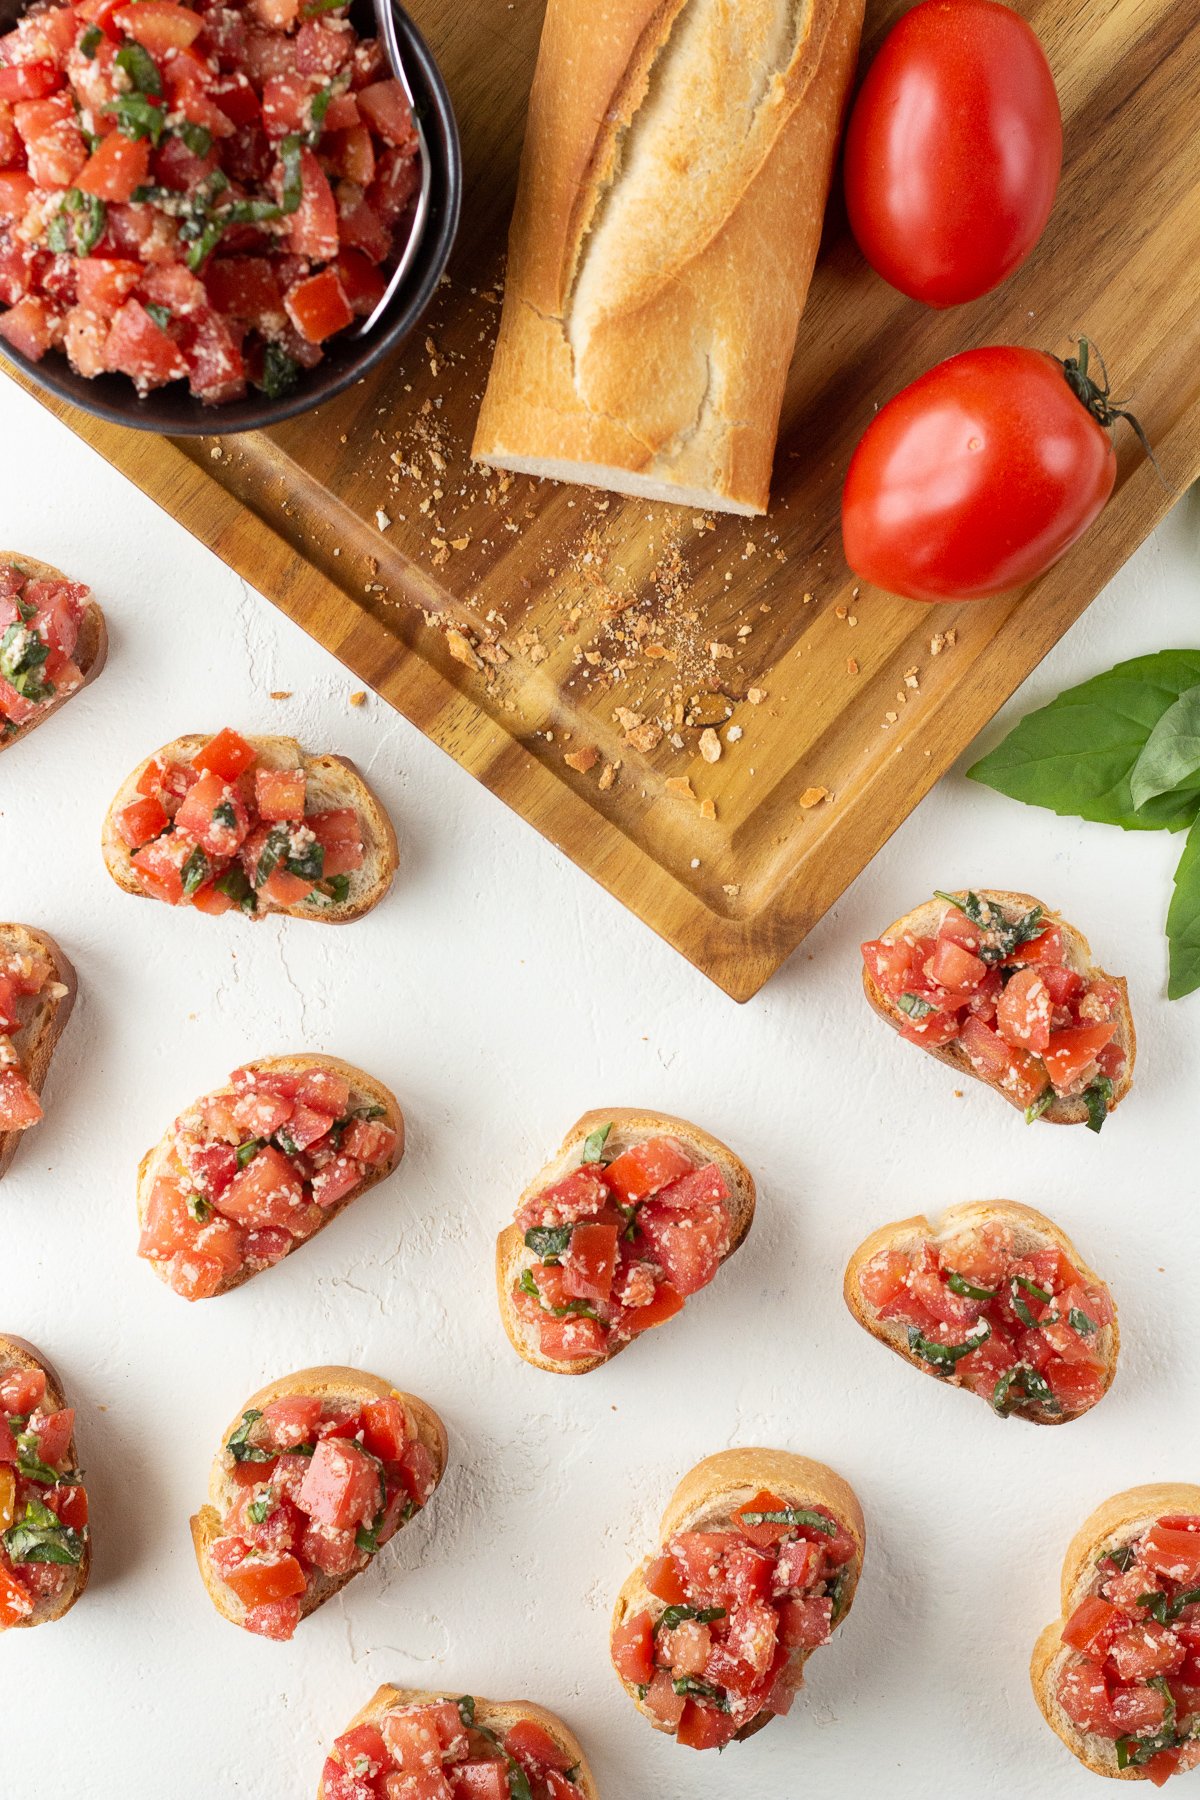 Top view of bruschetta lined up on a counter.